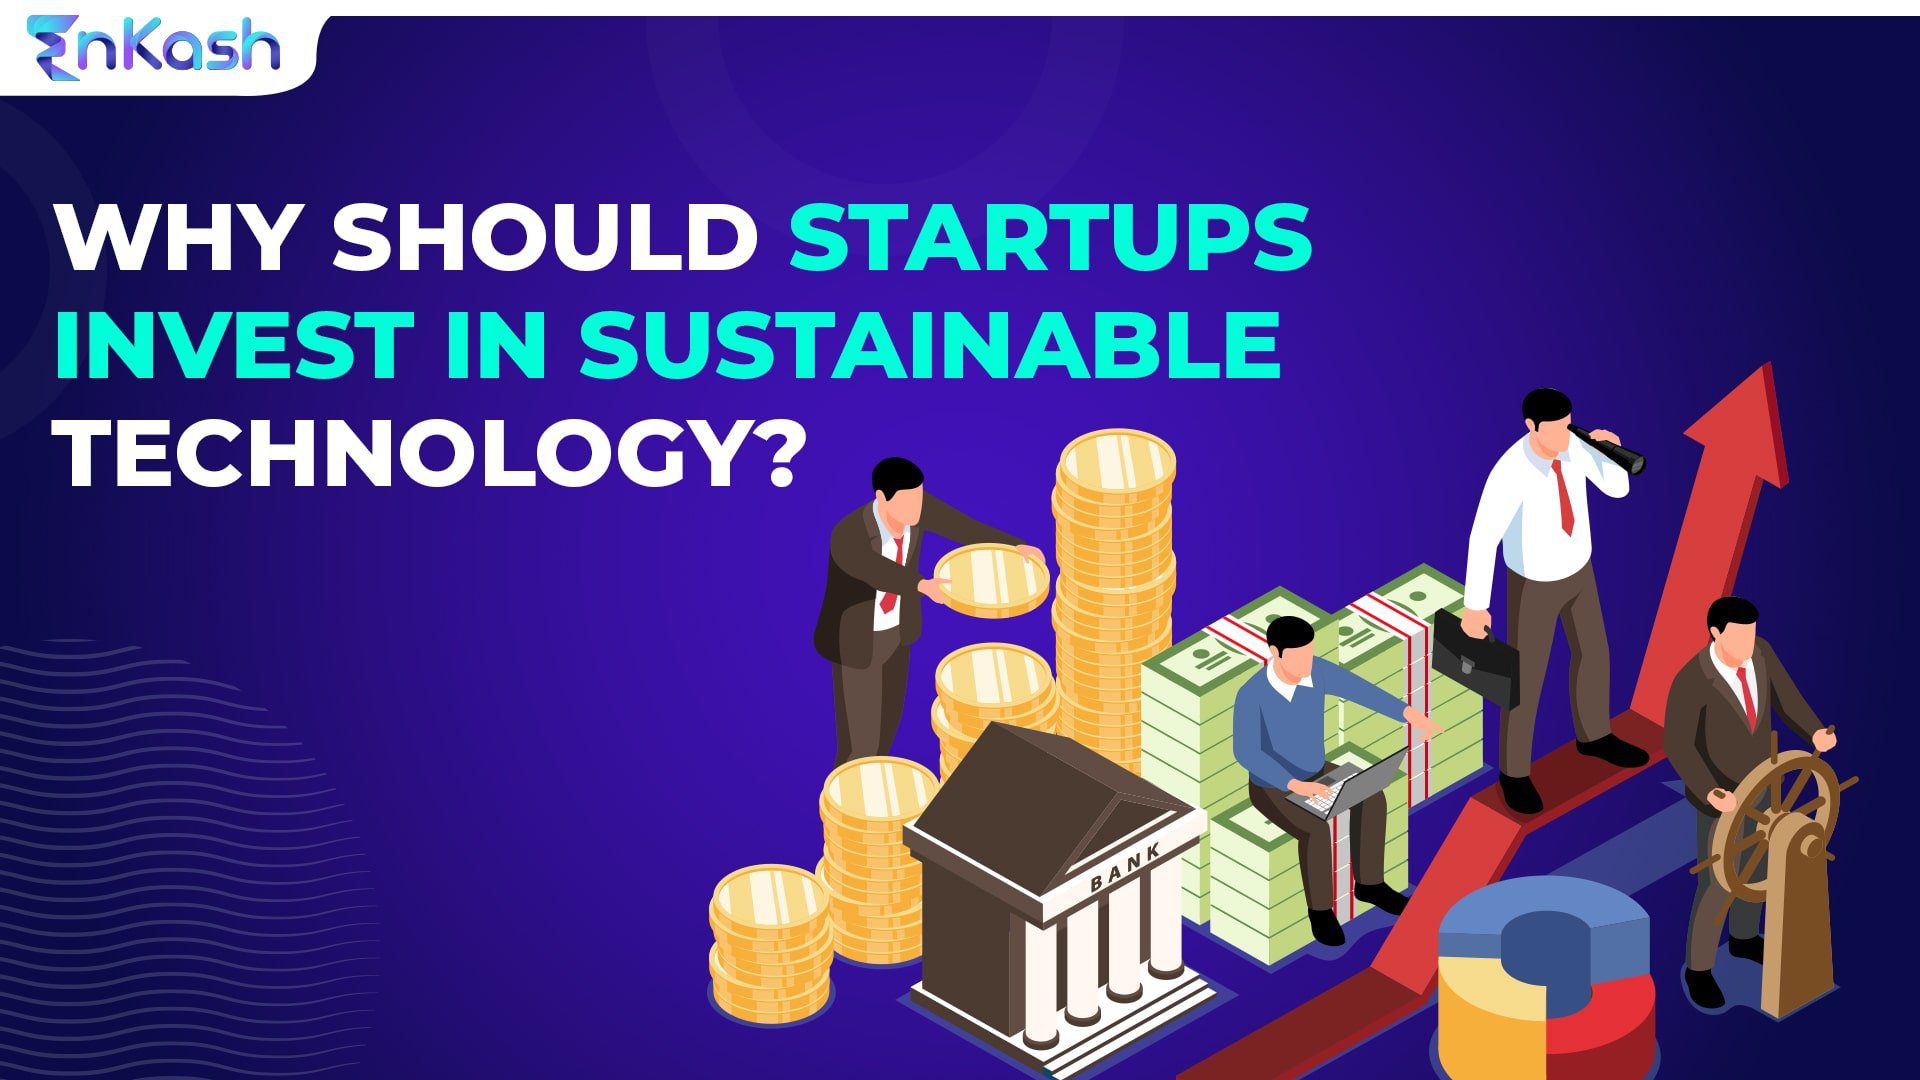 Why should startups invest in sustainable technology